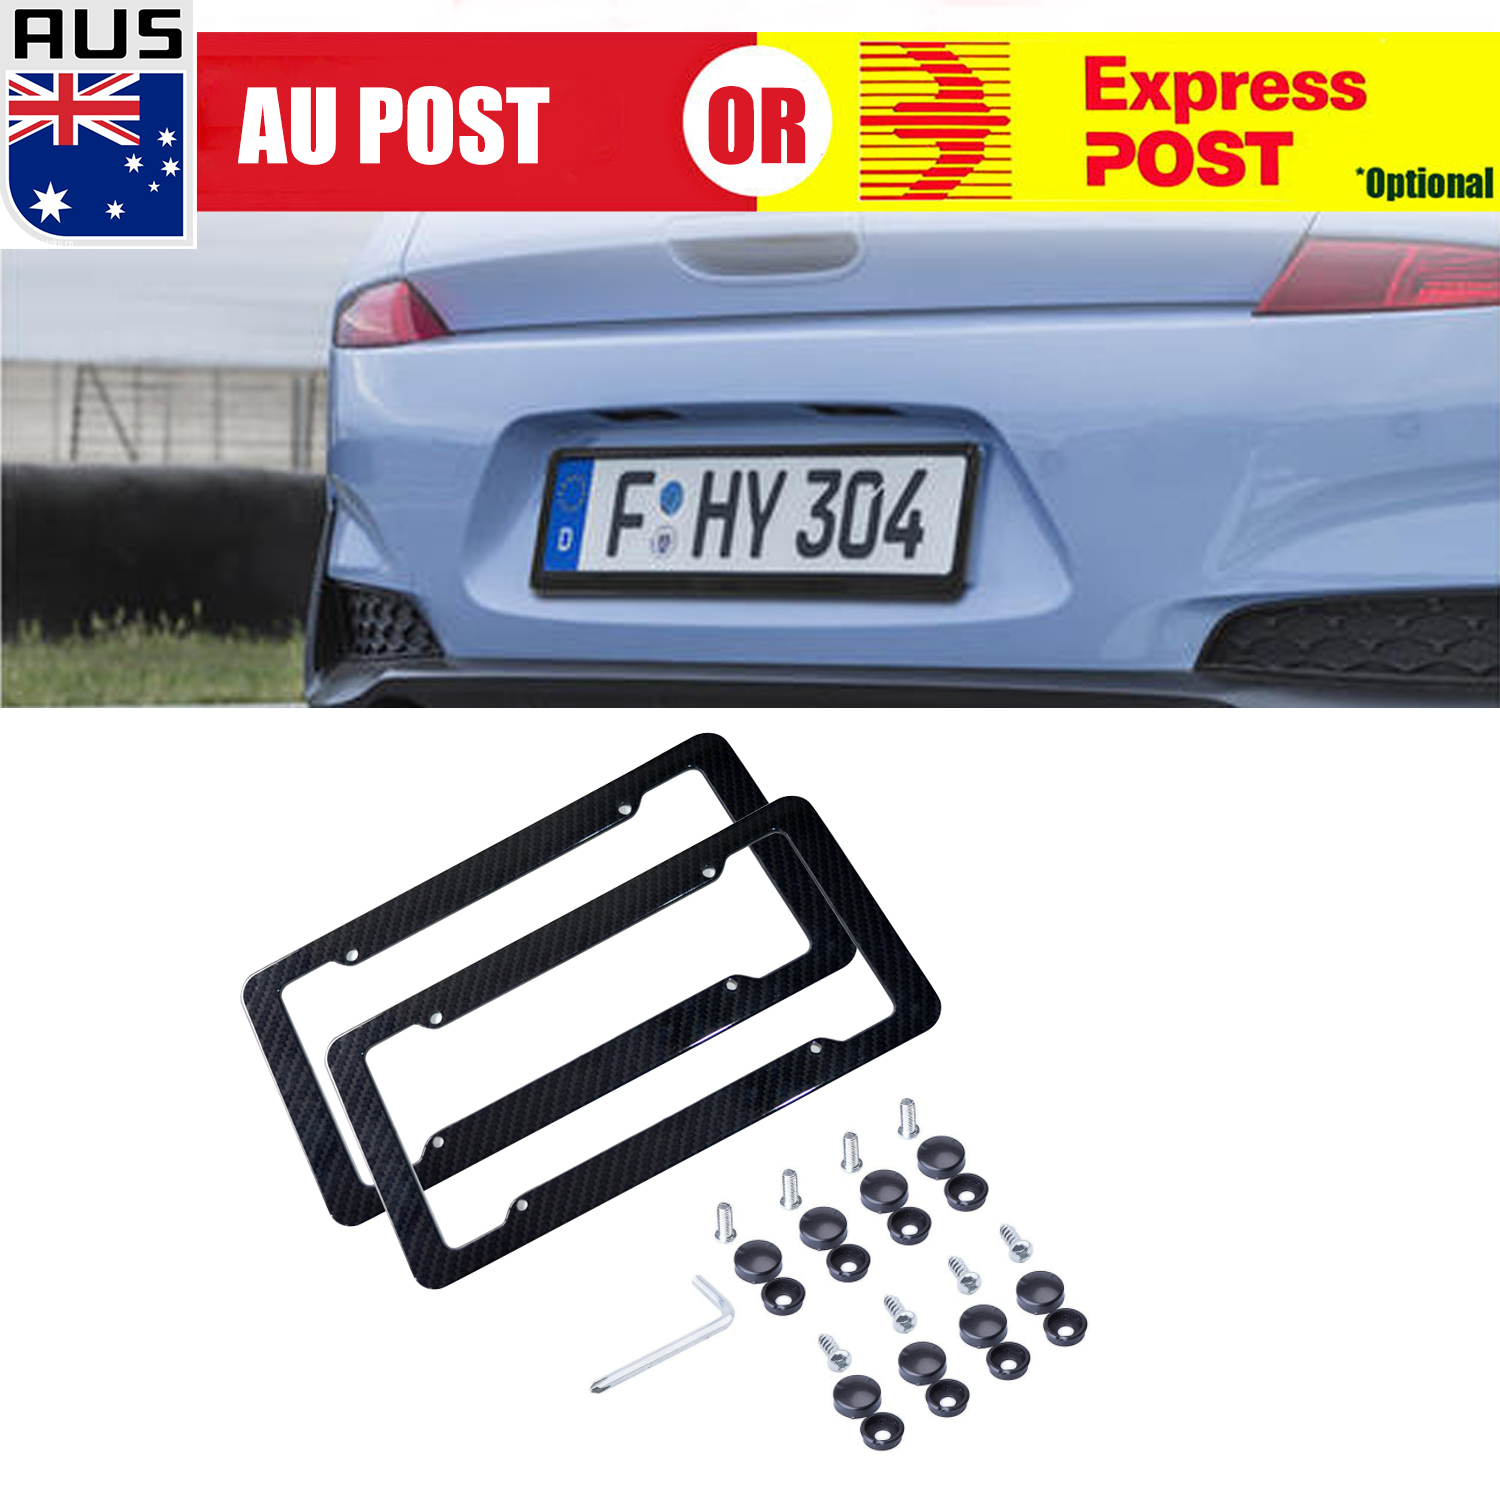 Blue 2 x Number Plate Holders Frames Licence Plate Surrounds for Any Car